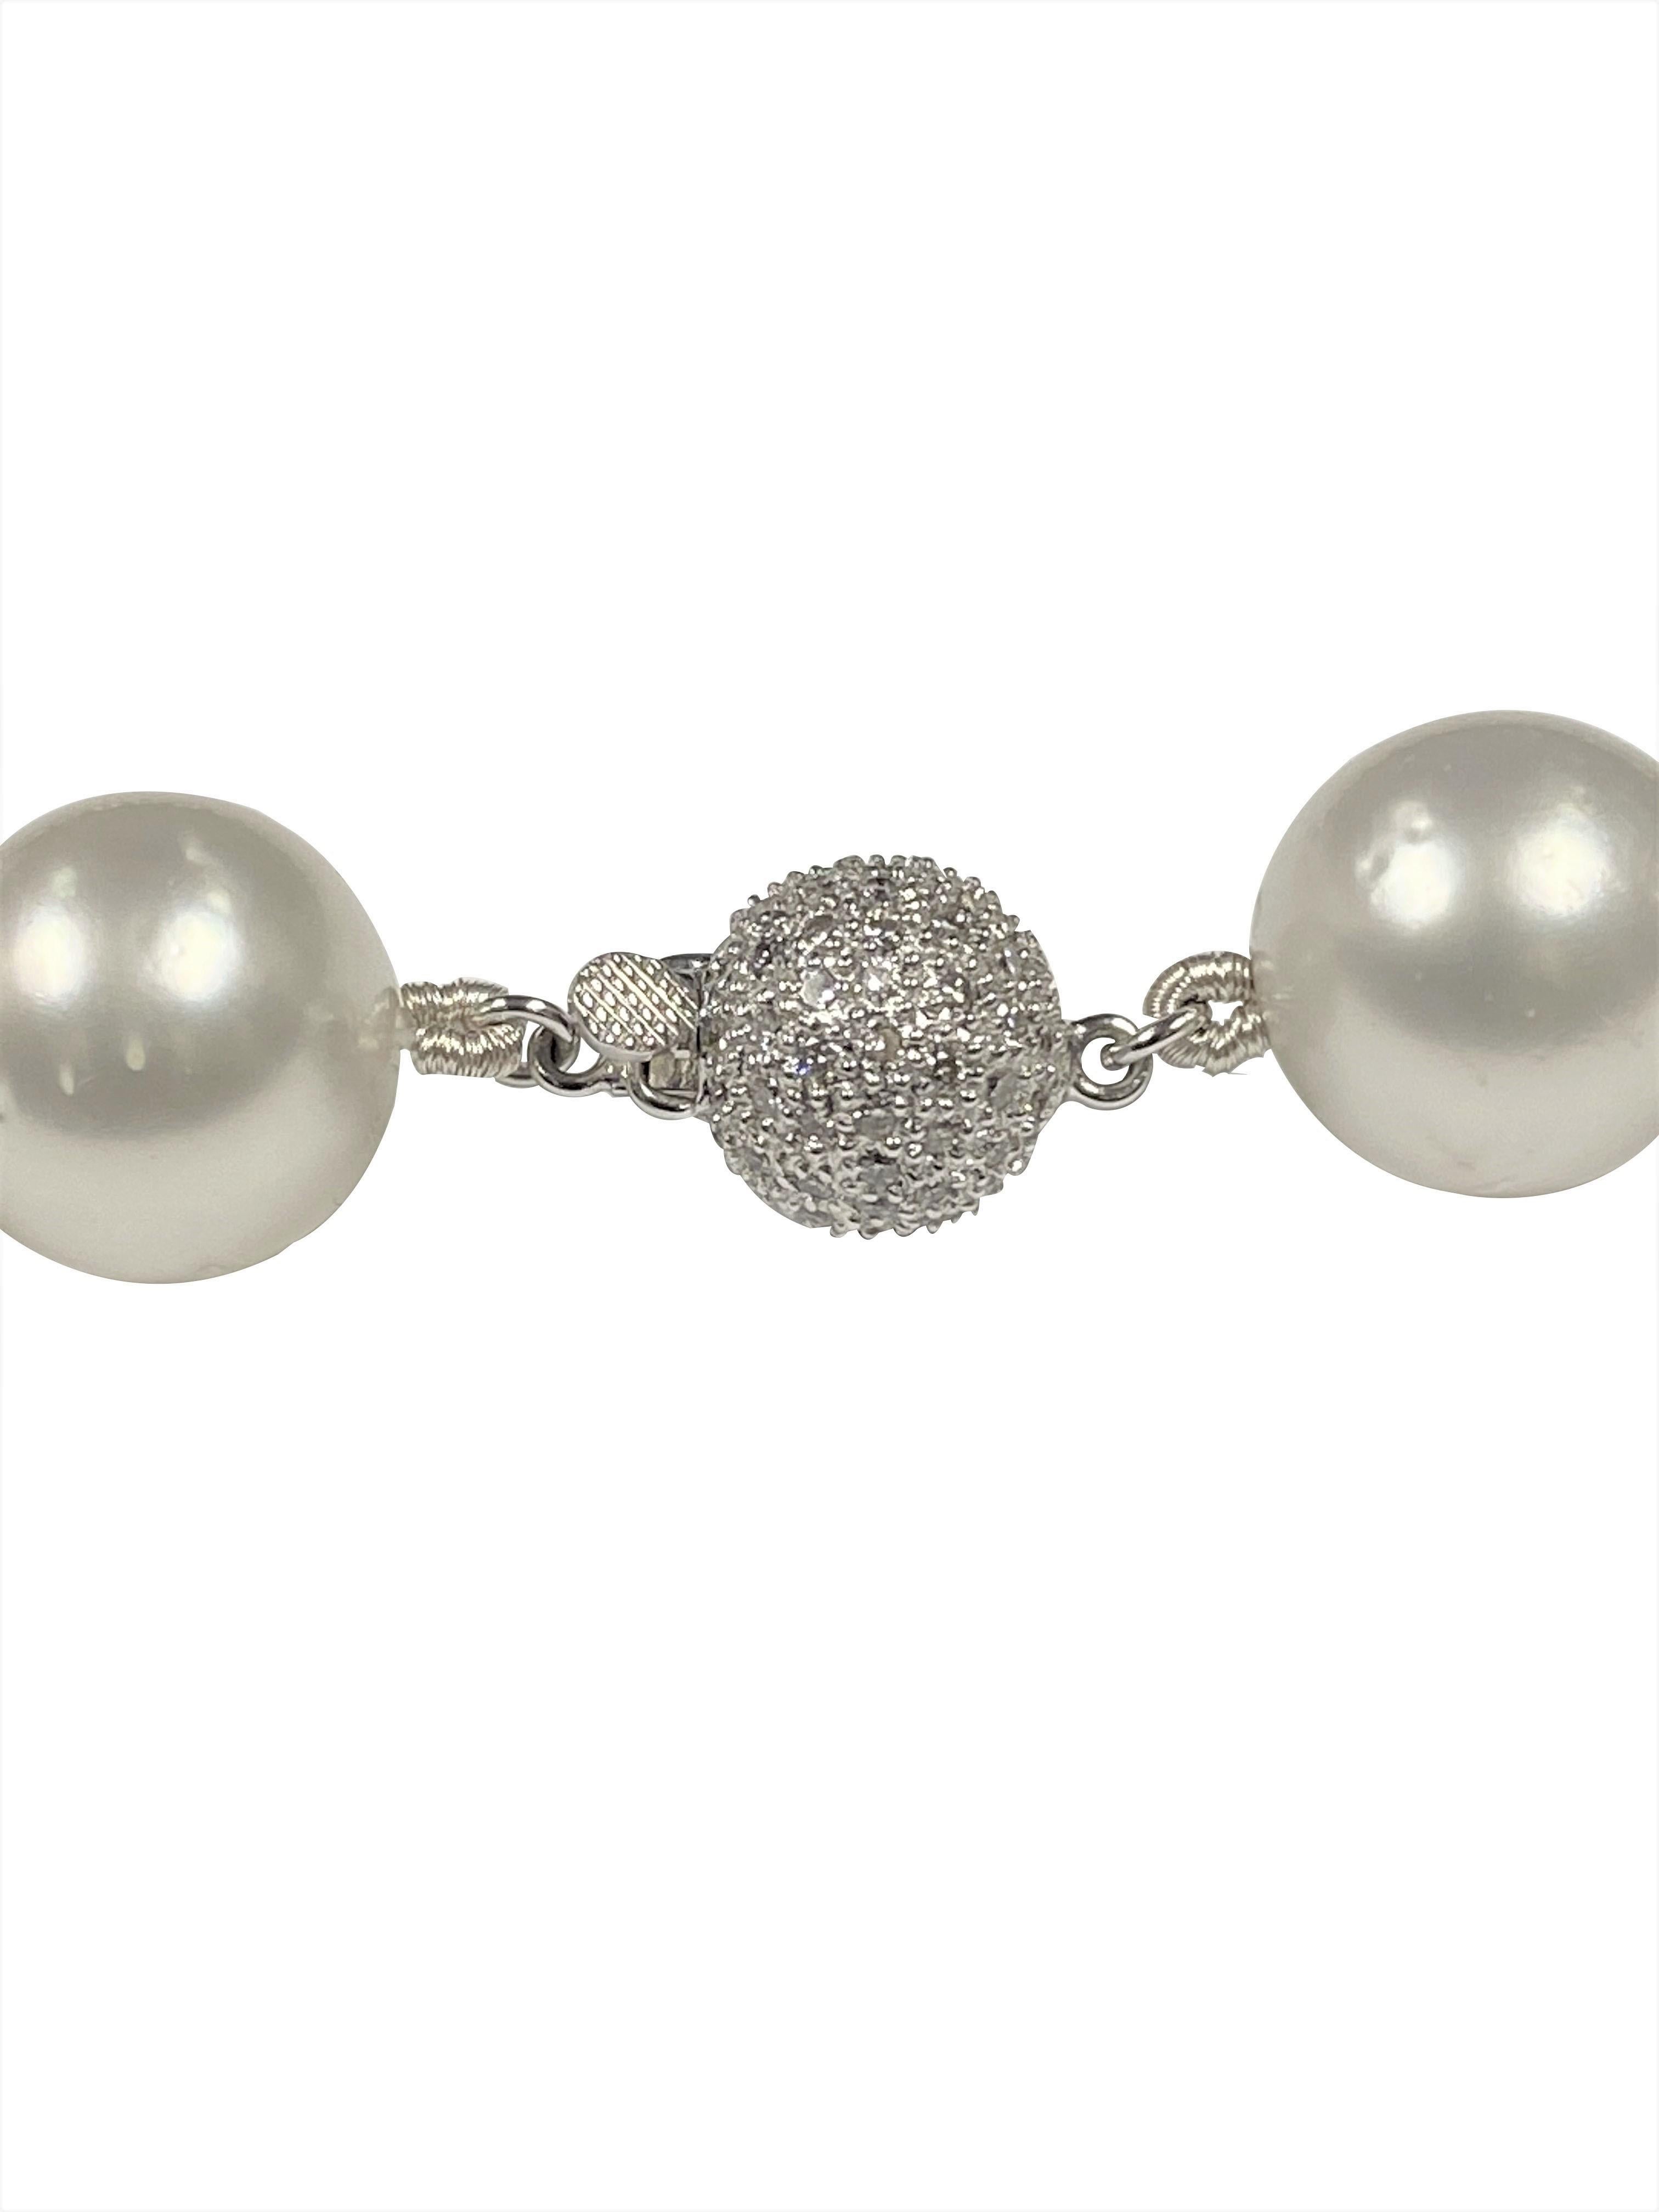 Round Cut Large South Sea Pearl Necklace with Diamond Clasp